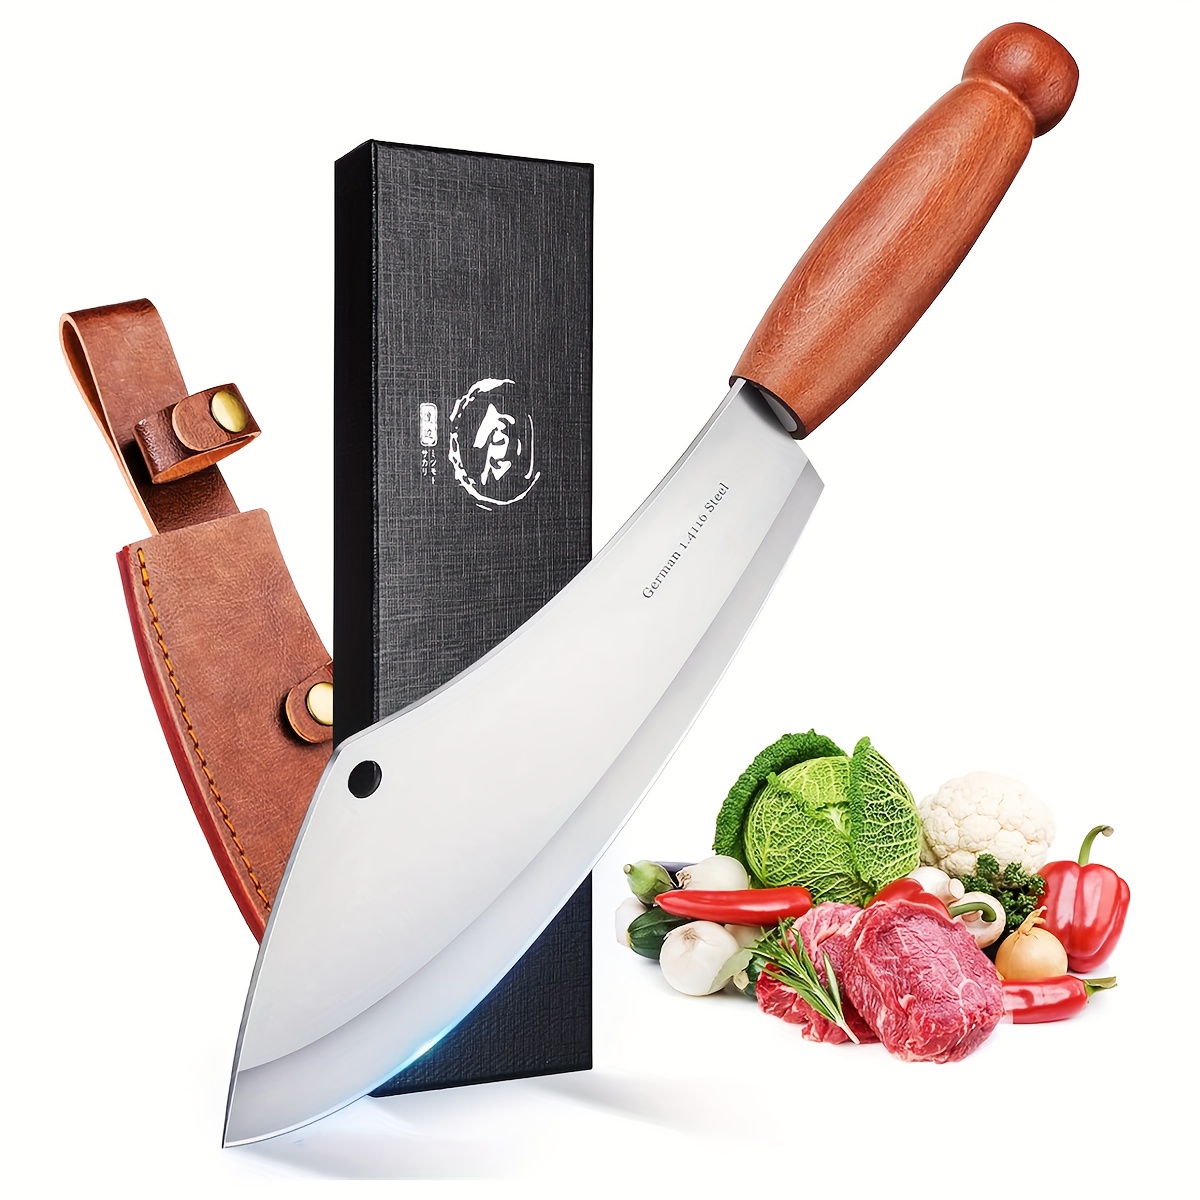 

Butcher Knife With Sheath Meat And Vegetable Cleaver Knife For Kitchen Or Camping Christmas Gifts For Men Father